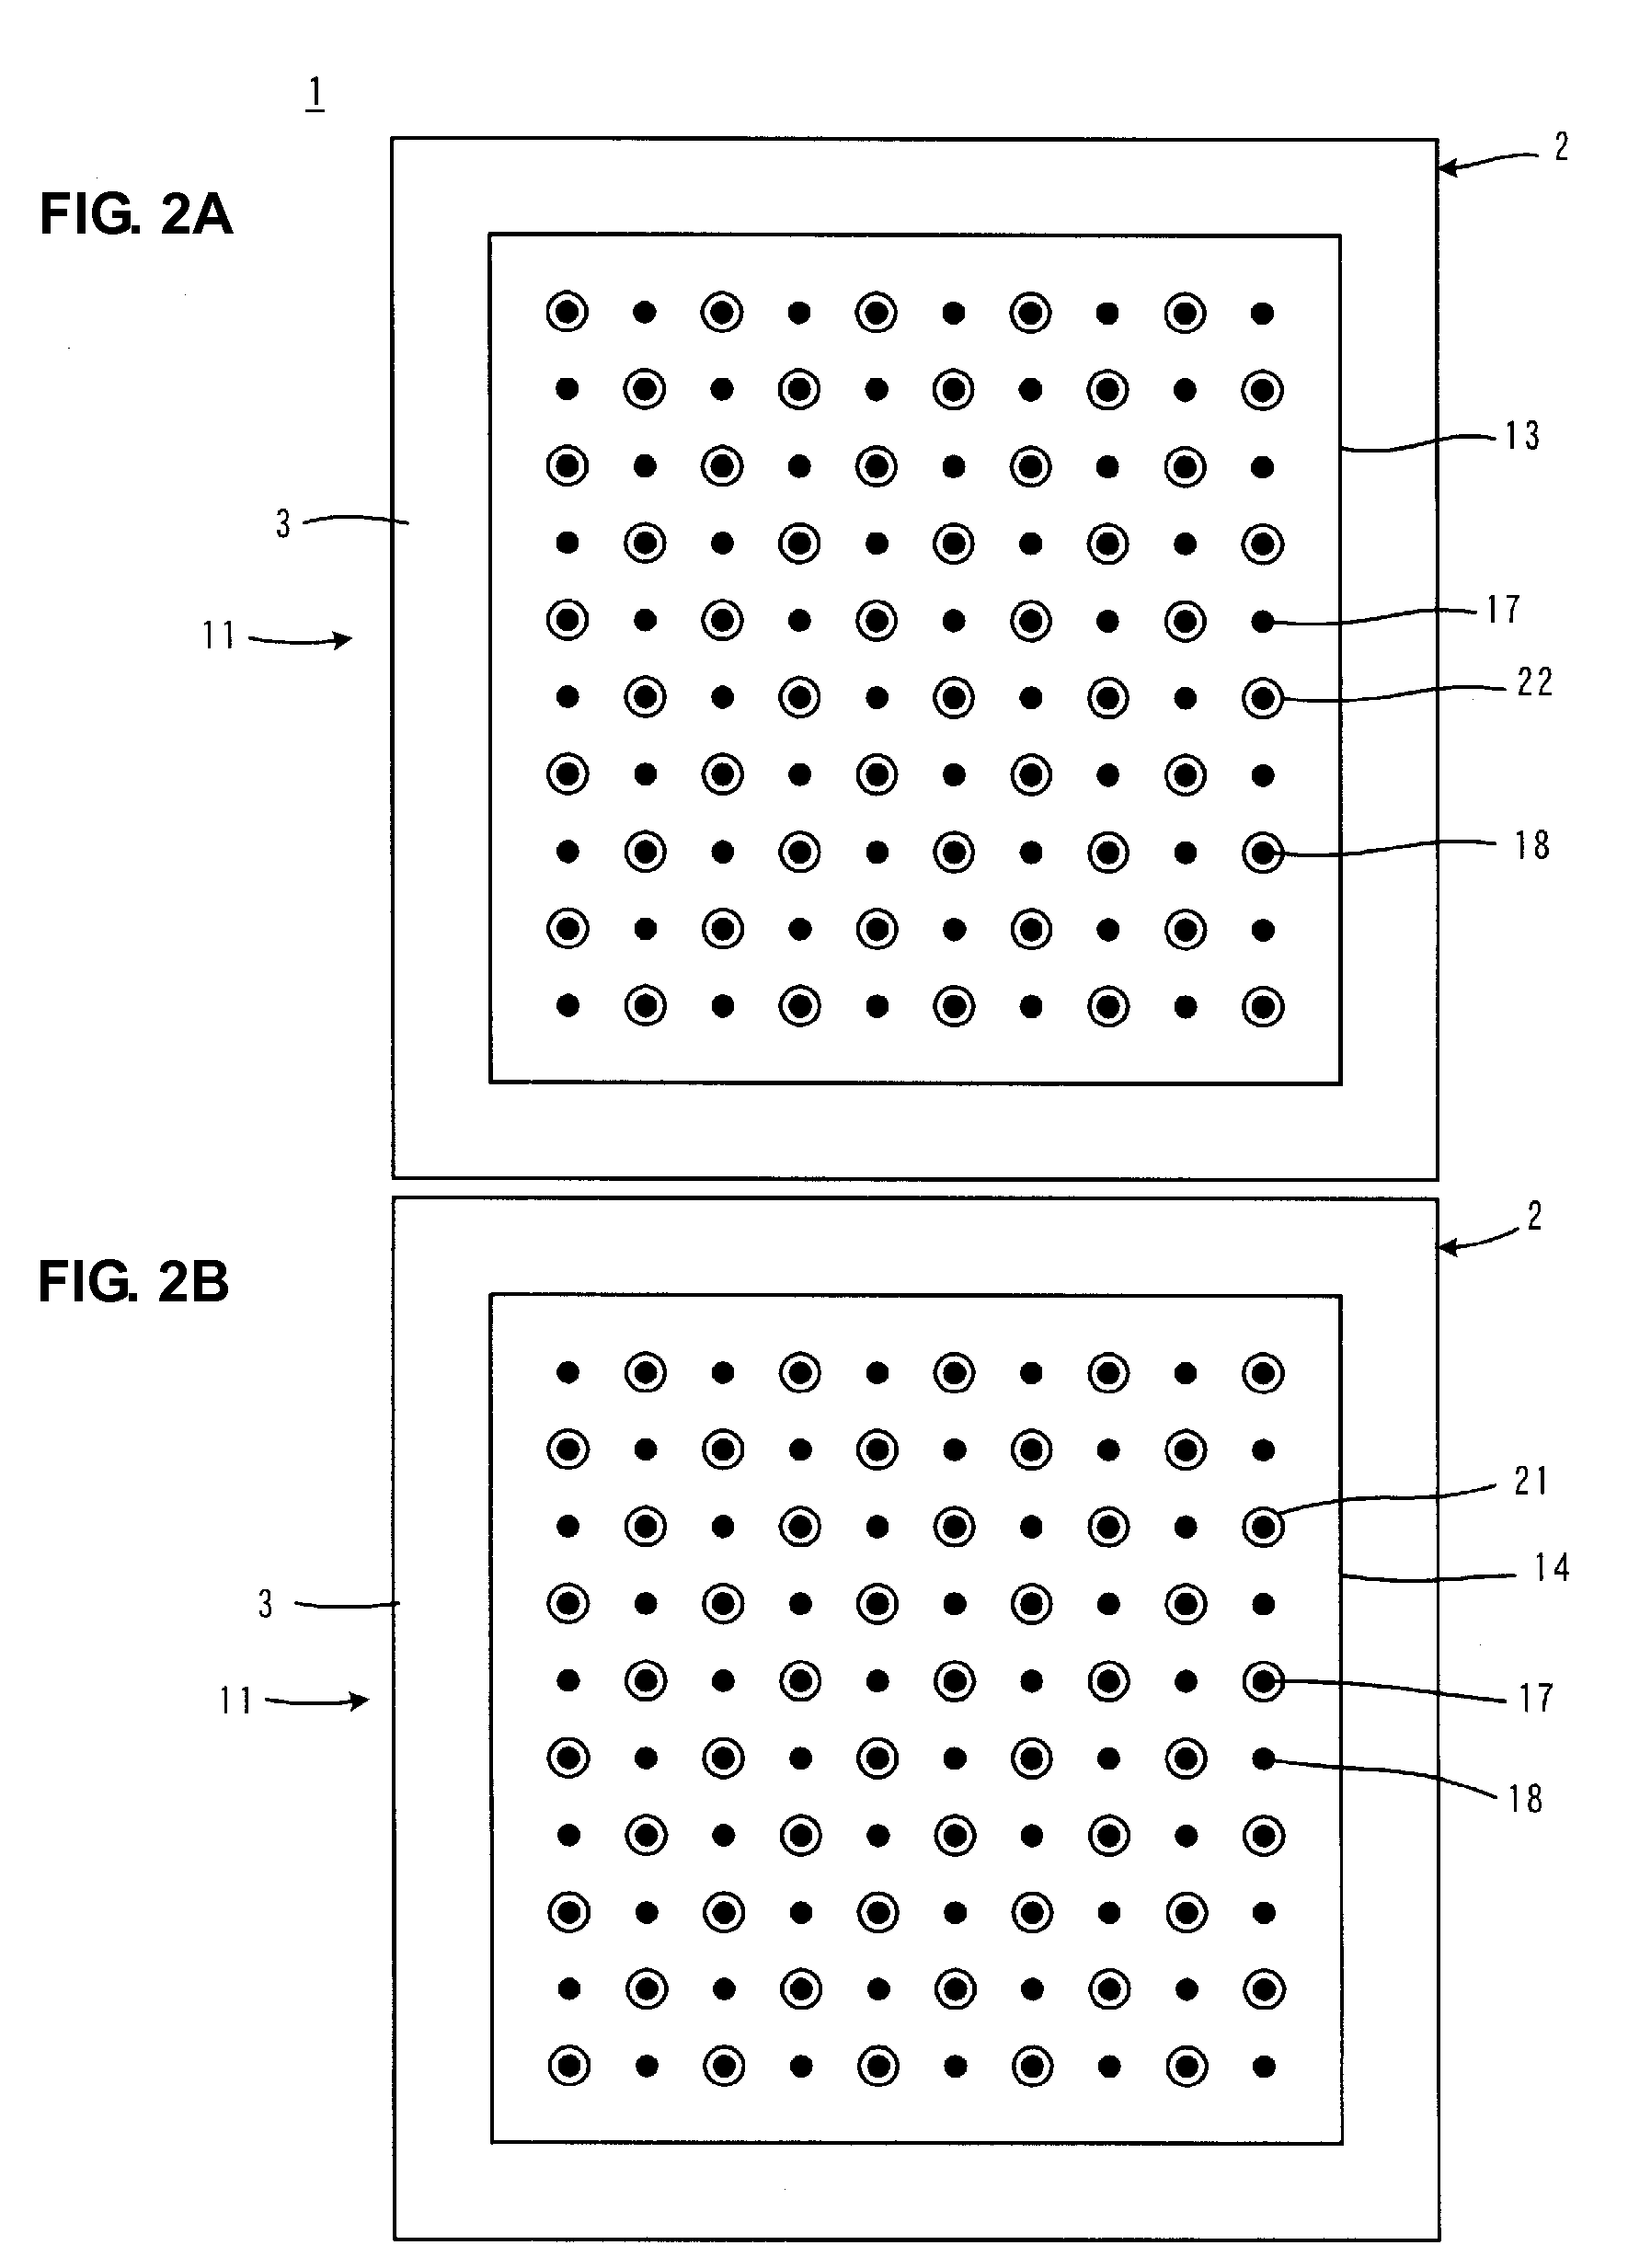 Layered capacitor and mounting structure